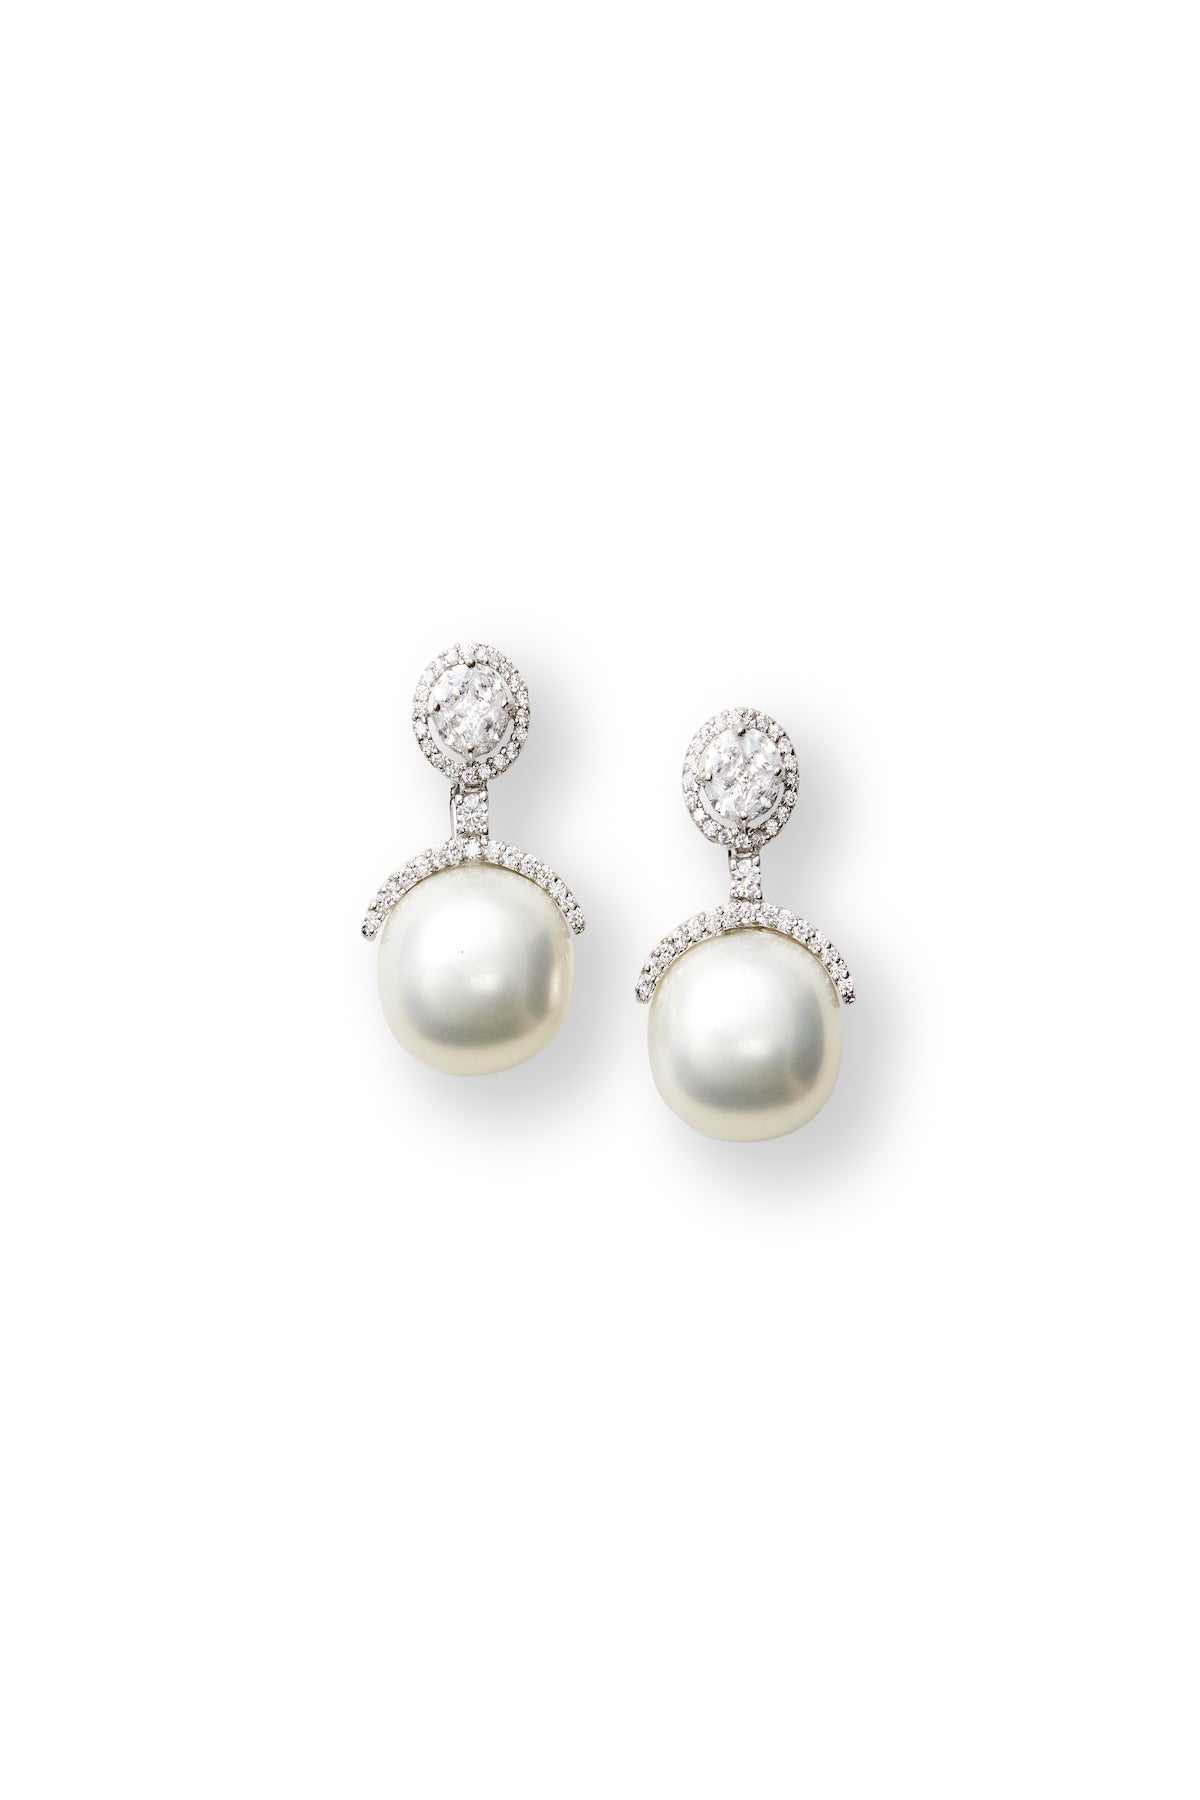 Cultured Freshwater Pearl Earrings with Diamond Drop